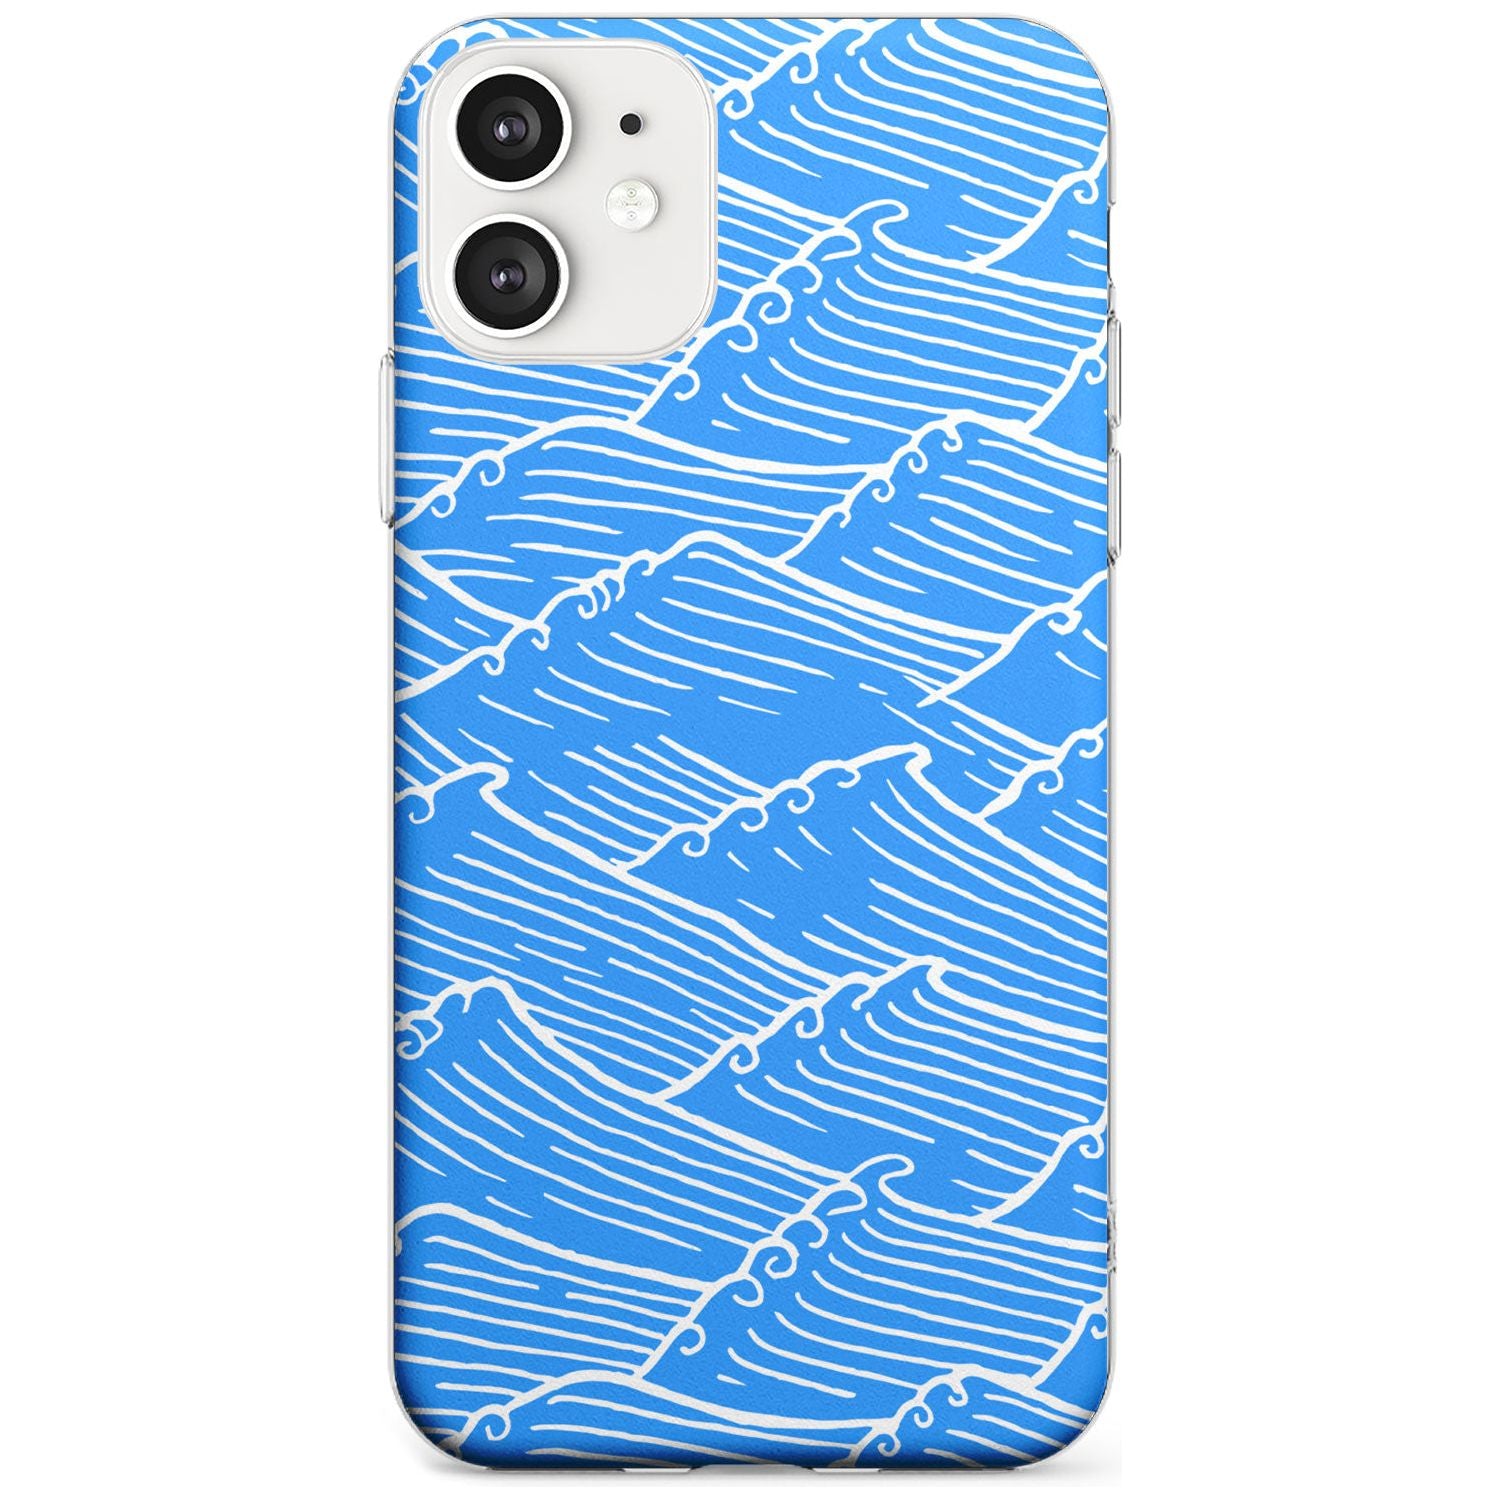 Waves Pattern Slim TPU Phone Case for iPhone 11